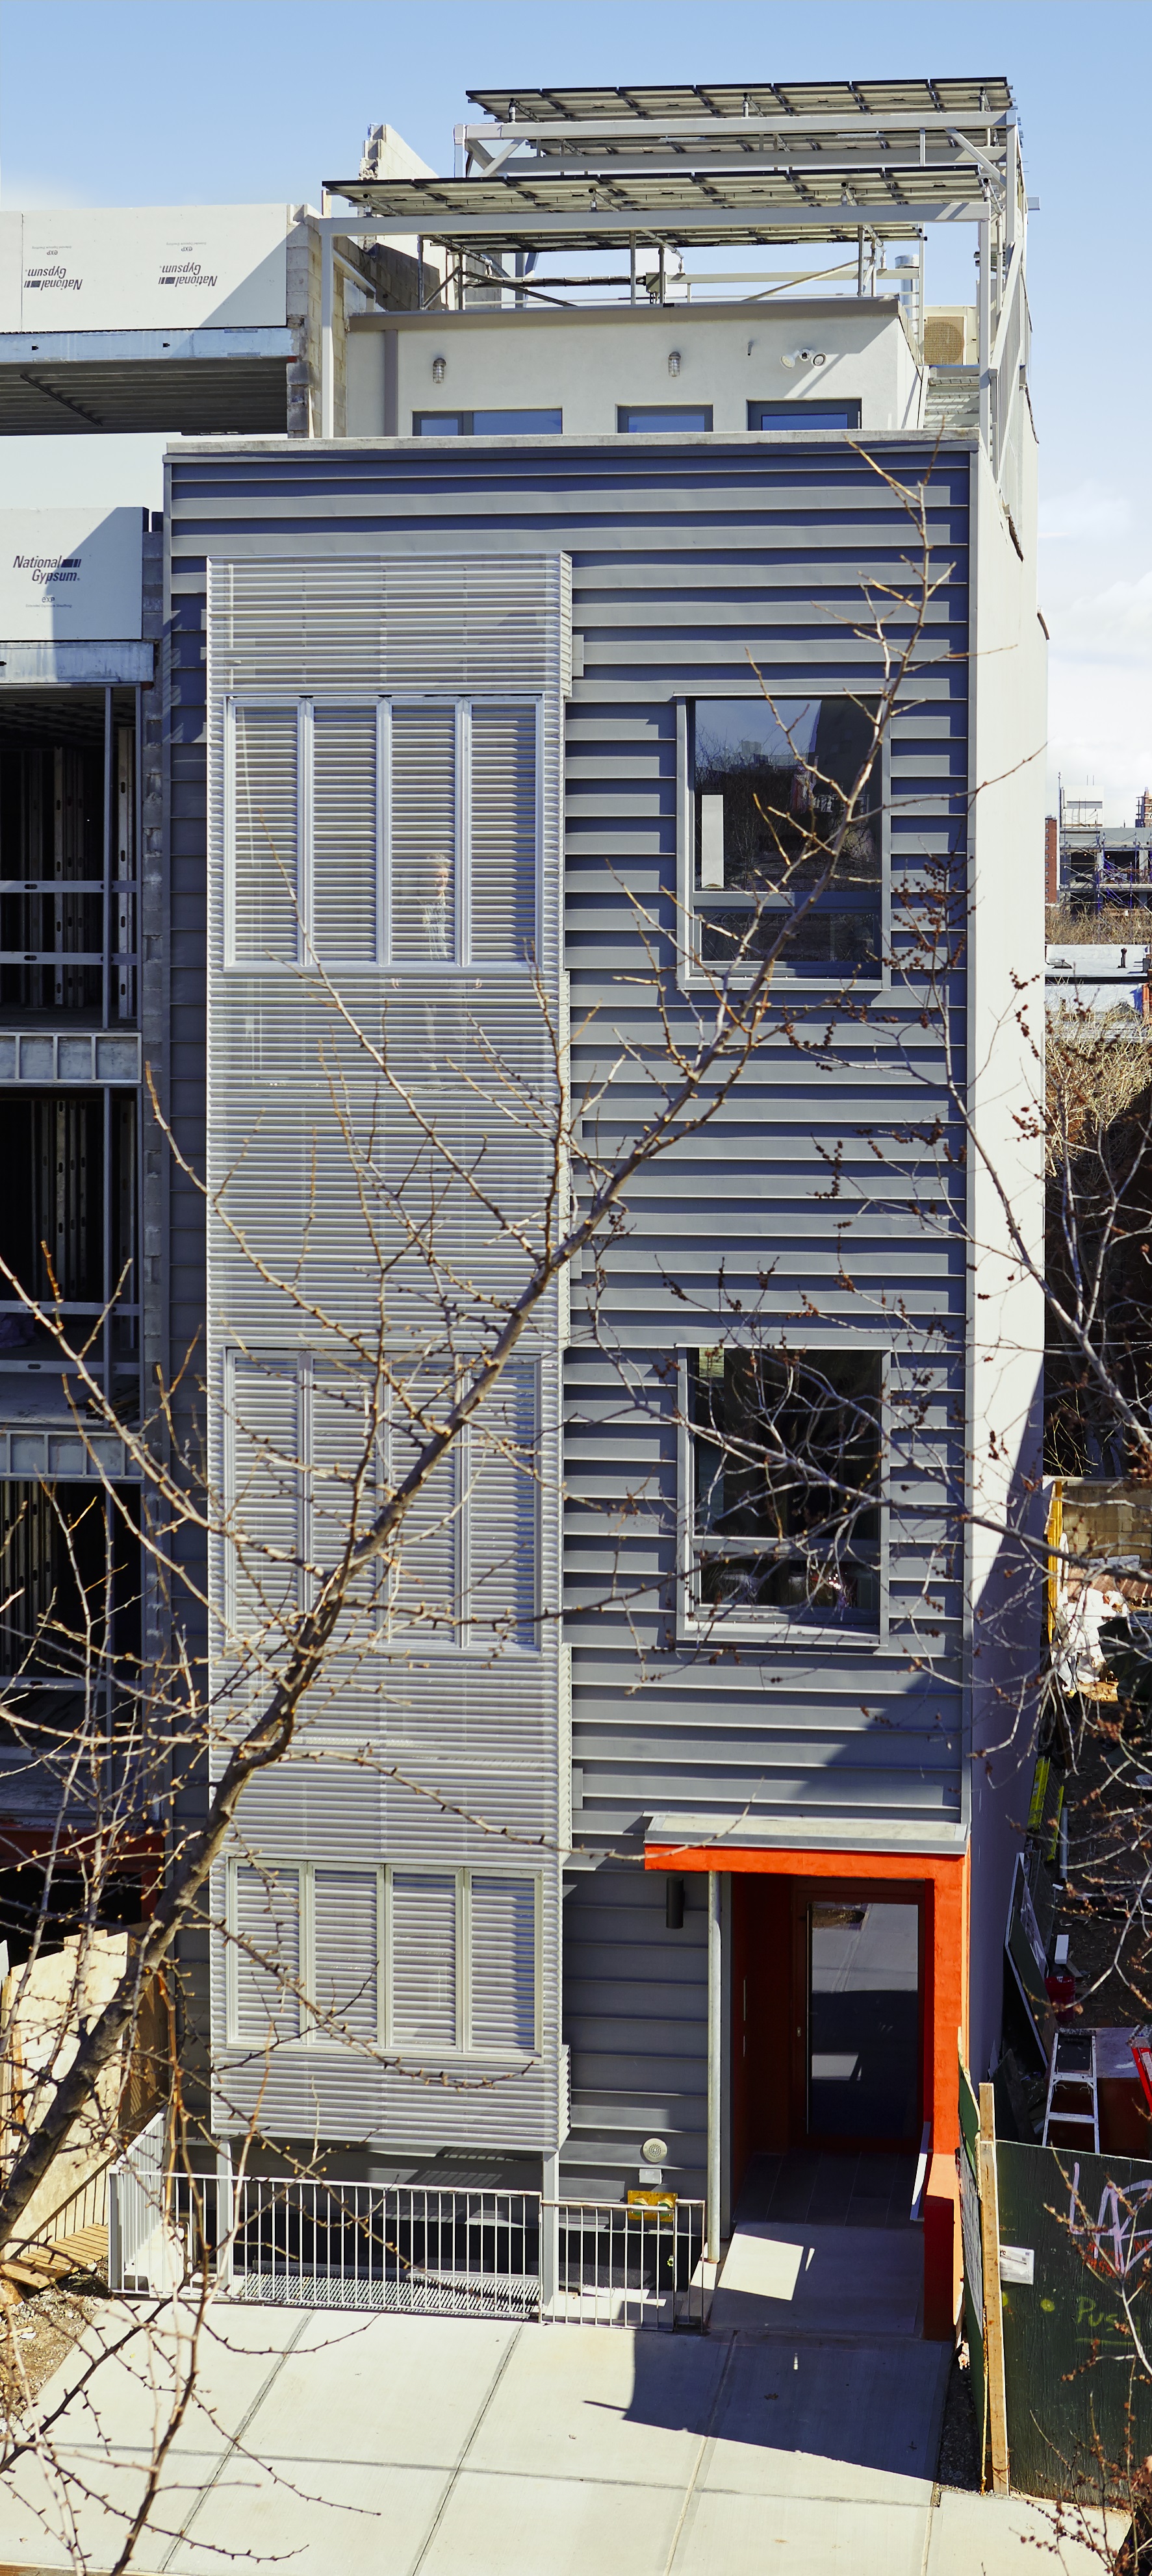 R-951 Residence: NYC Passive House + Net Zero Row House by Paul A. Castrucci, Architect. Photo: Timothy Bell.